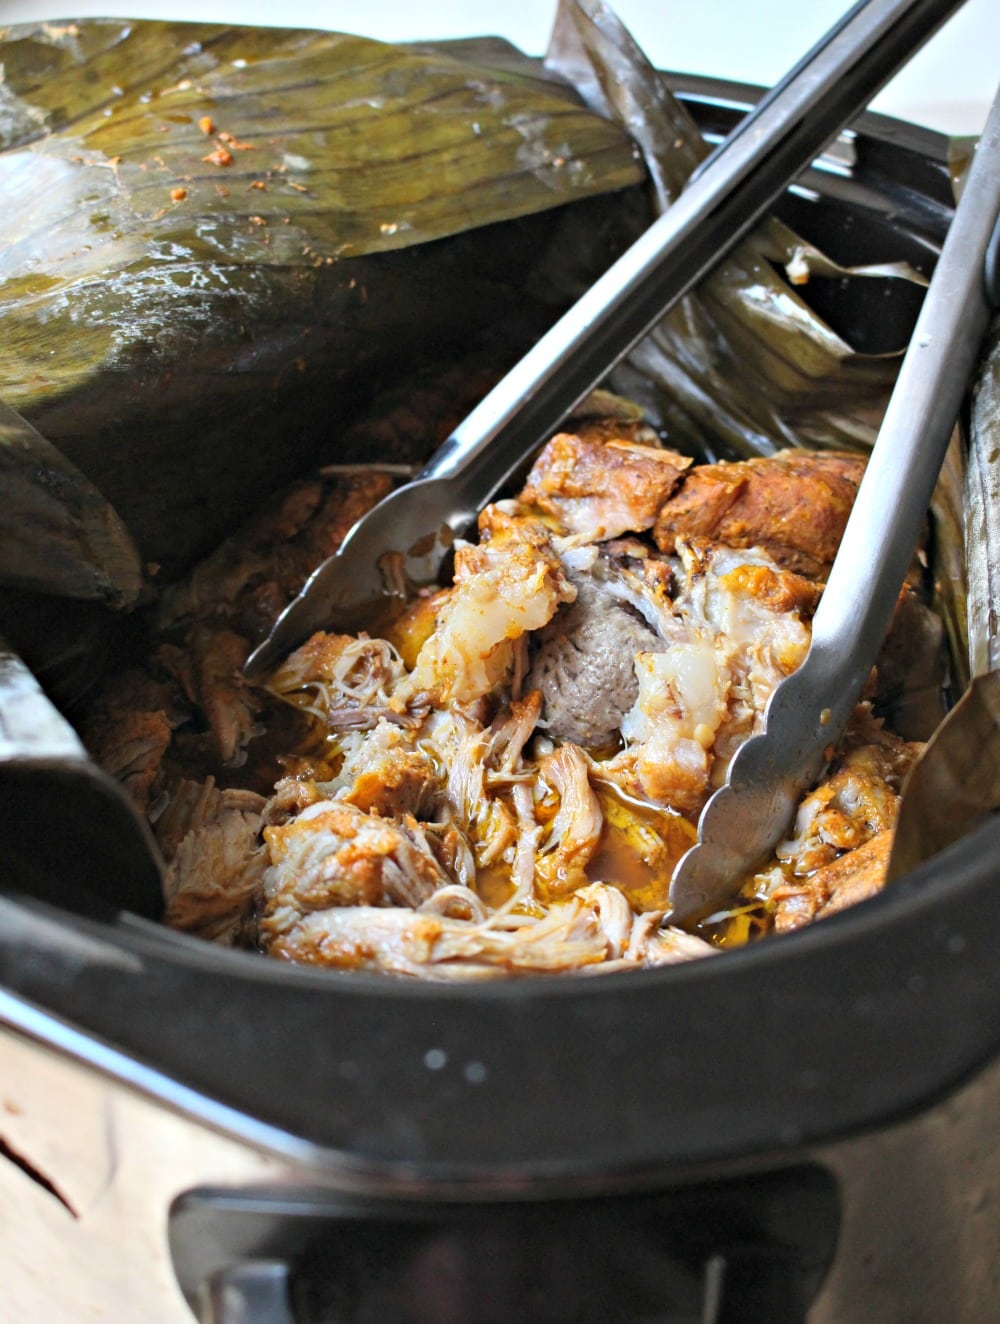 Cooked cochinita pibil in a crock pot with the banana leaves opened and tongs inside.